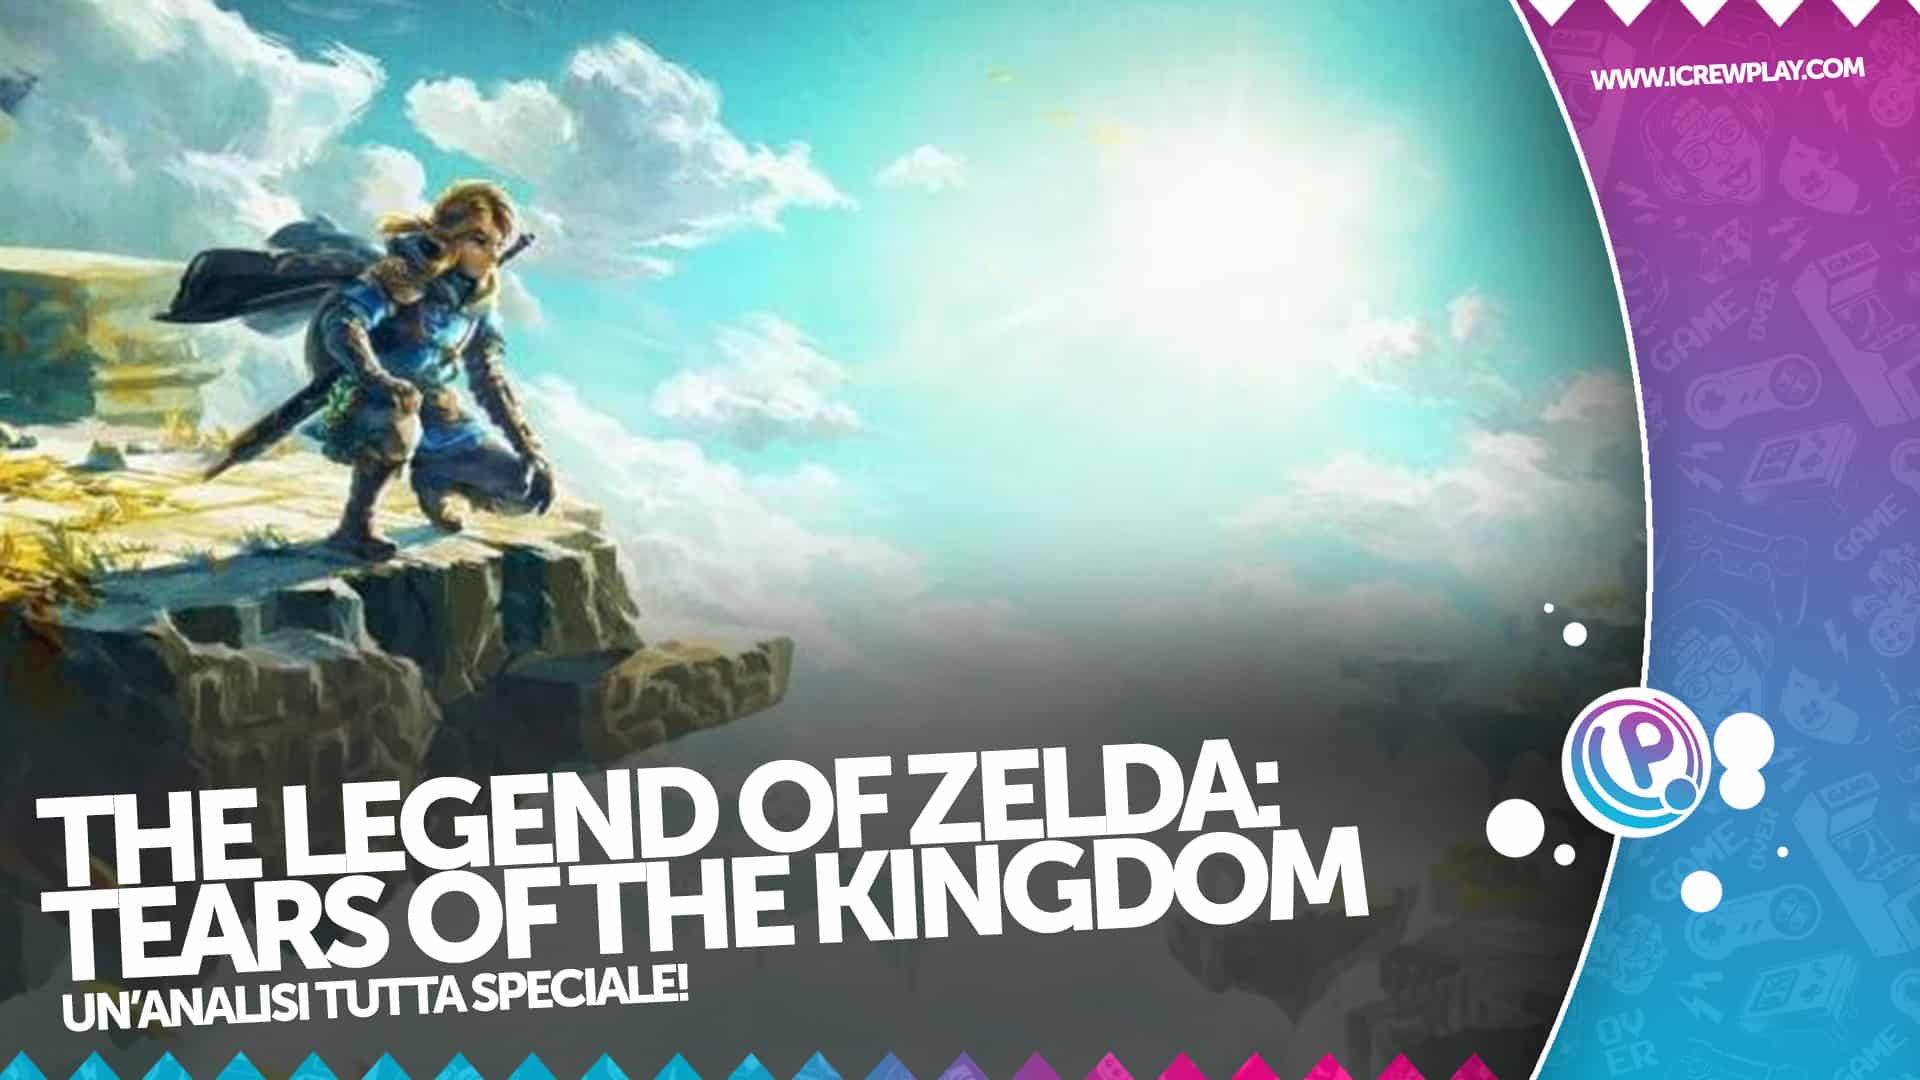 Analisi di The Legend of Zelda Tears of The Kingdom 2